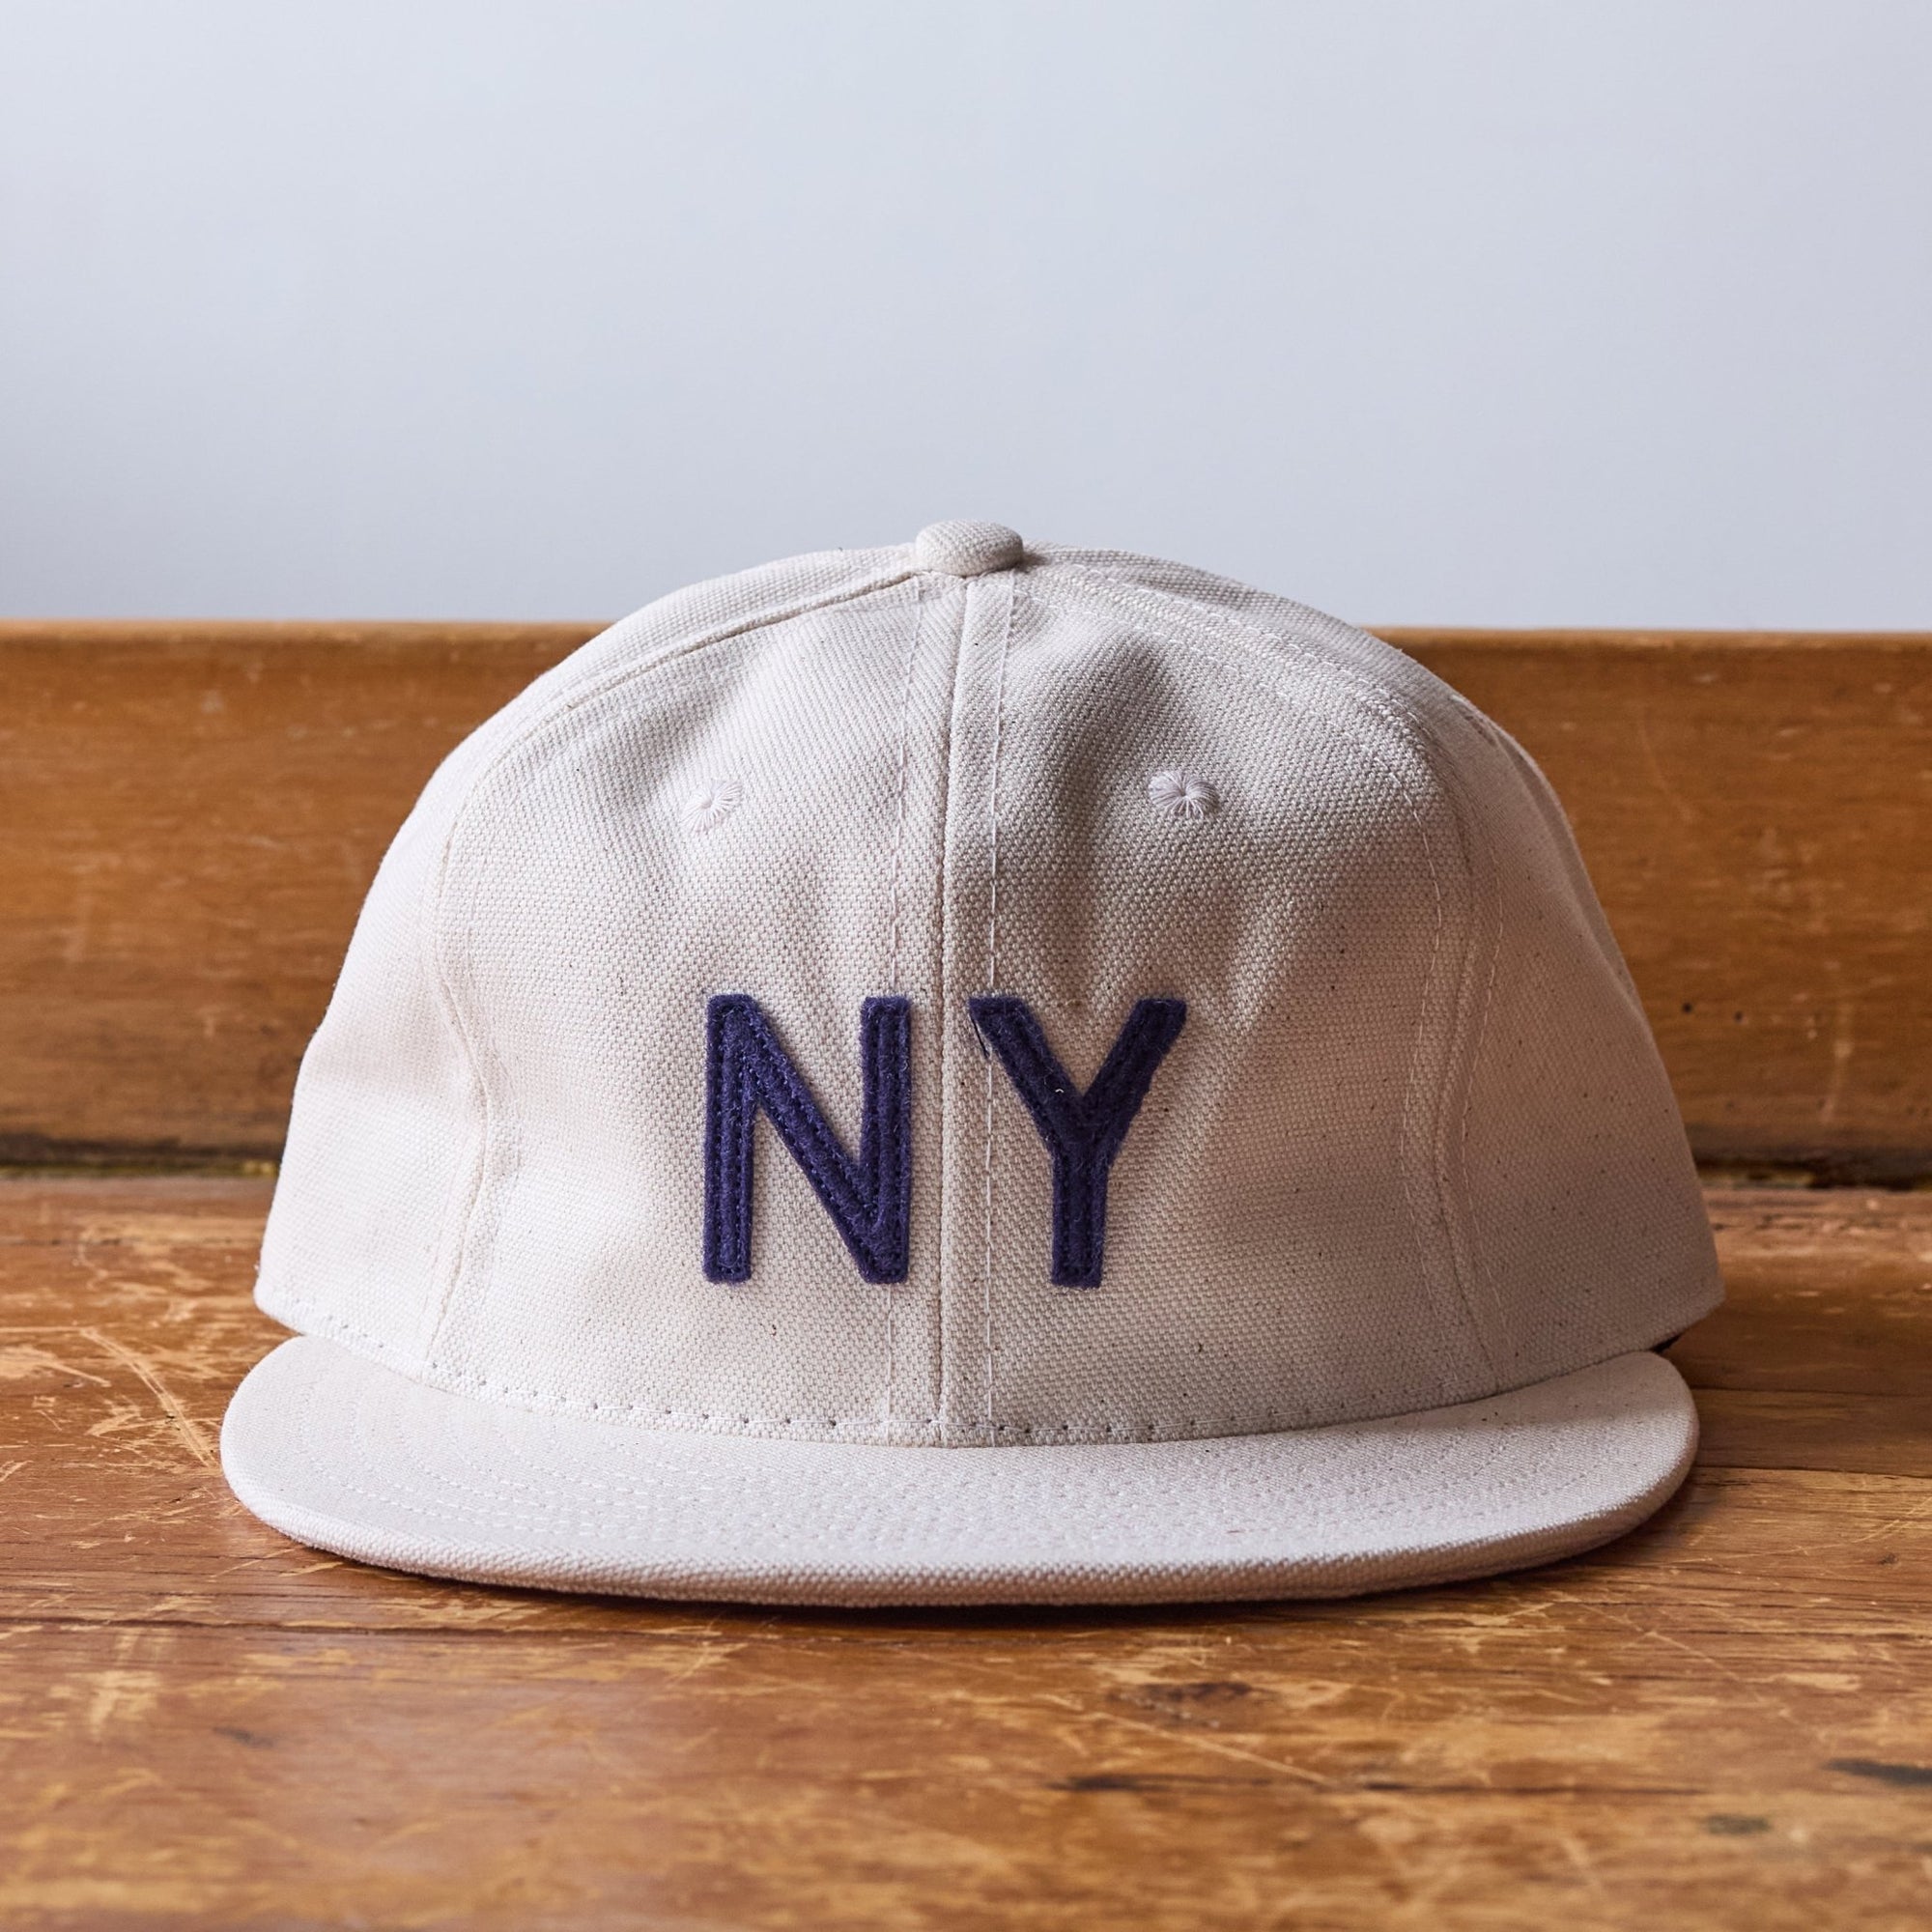 GS x Ebbets Field Flannels Cotton Canvas Hat: Natural / Navy NY - grown&sewn